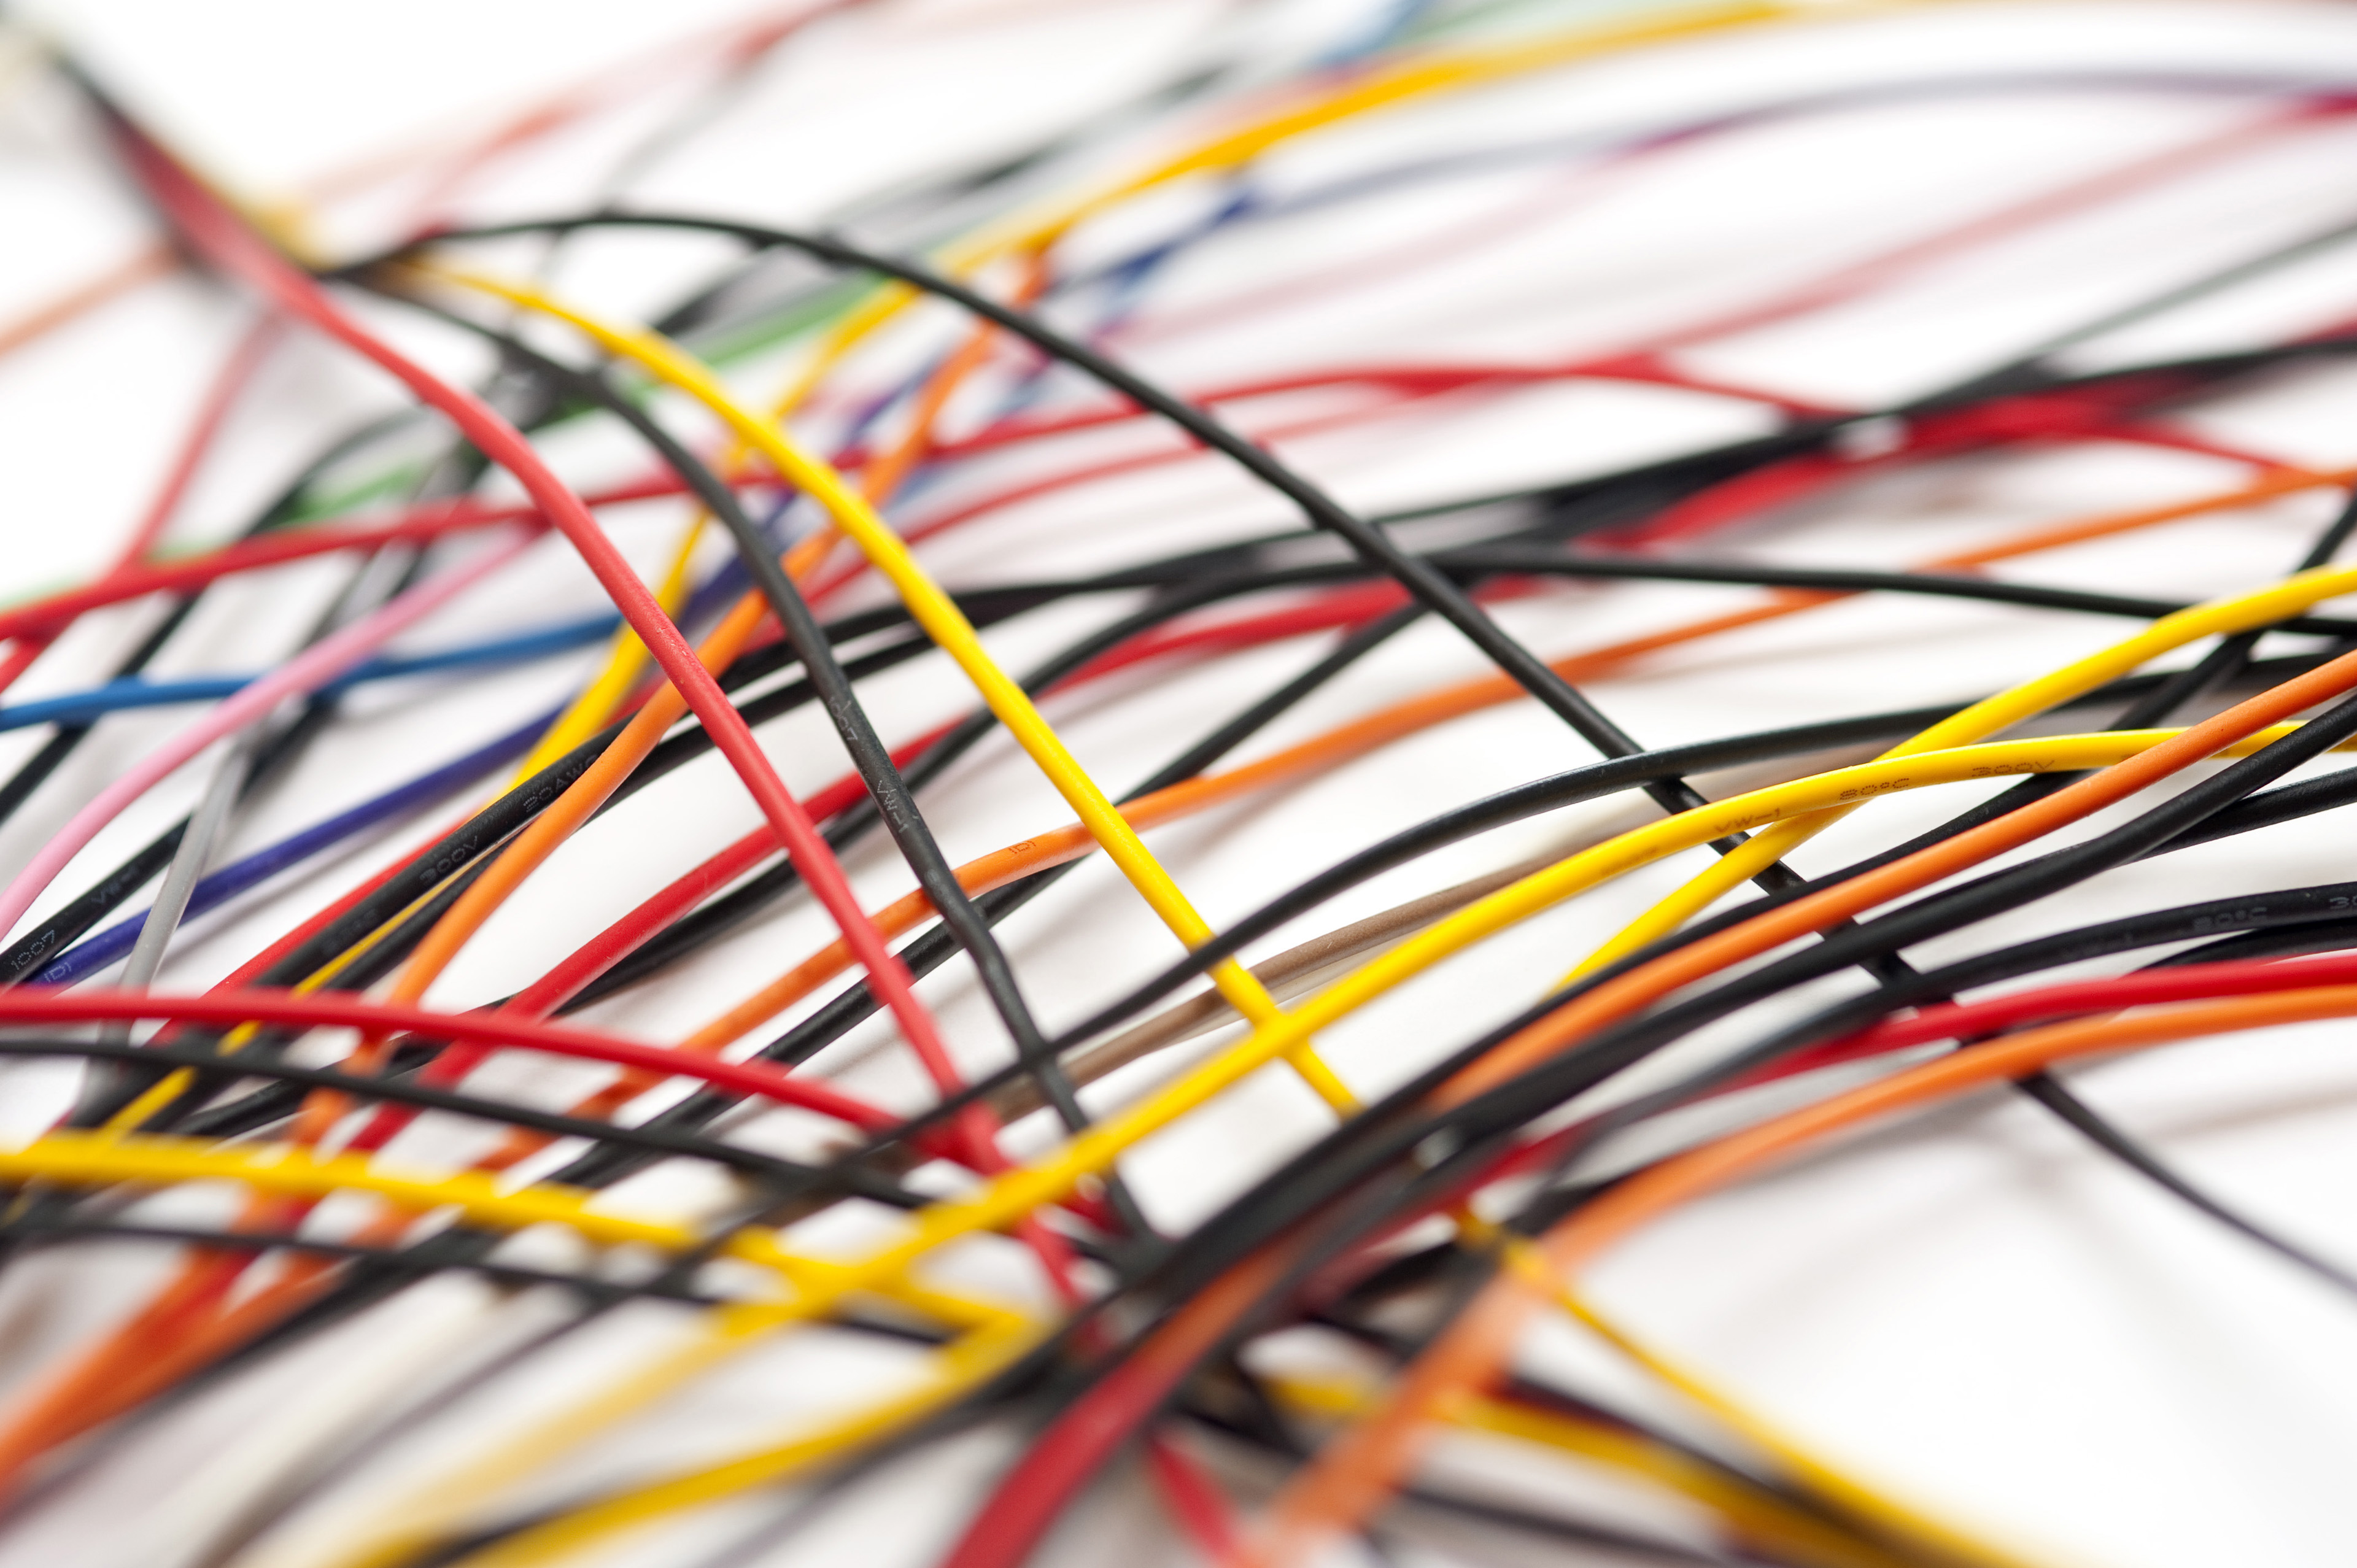 Image of Tangle of colorful electric wires and cables | Freebie ...